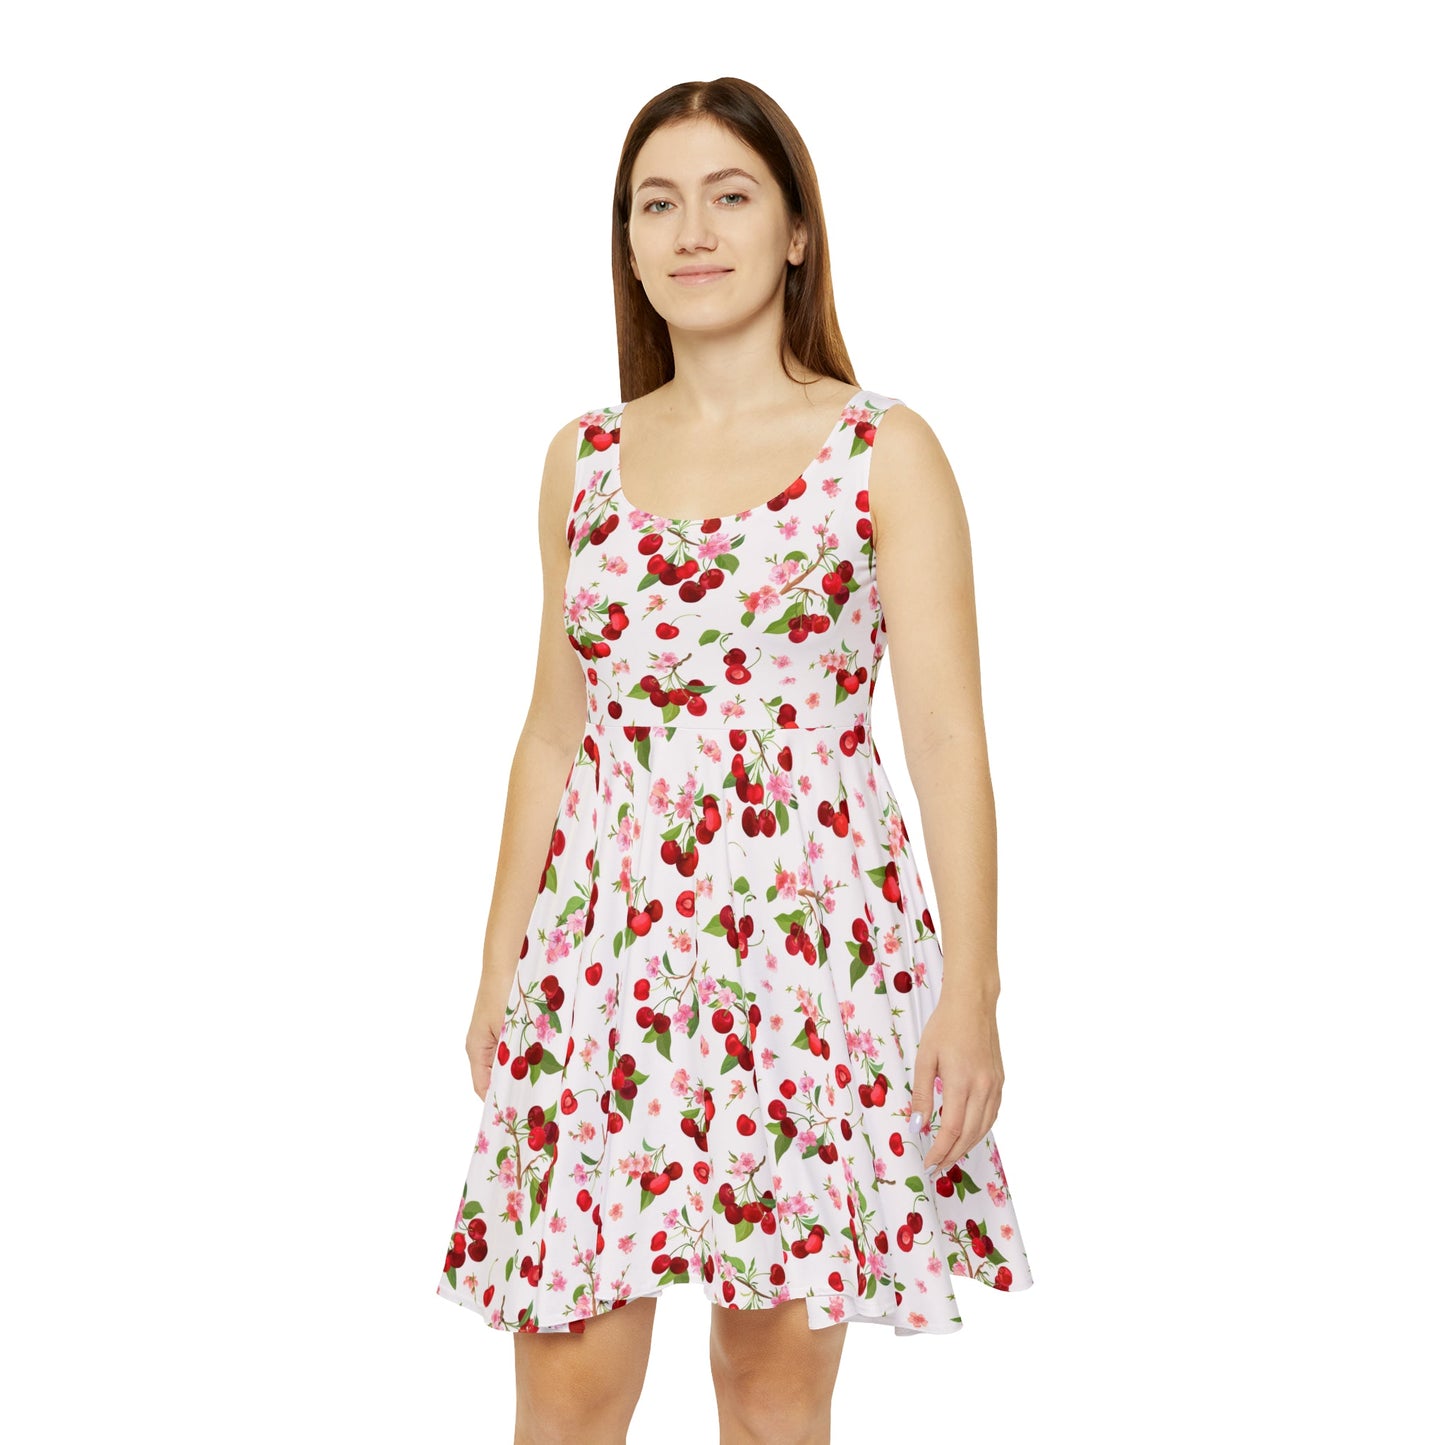 All Over Prints - Women's Skater Dress Cherry On A Stem Very Blossom Skater Dress, Wedding, Cocktail And Casual